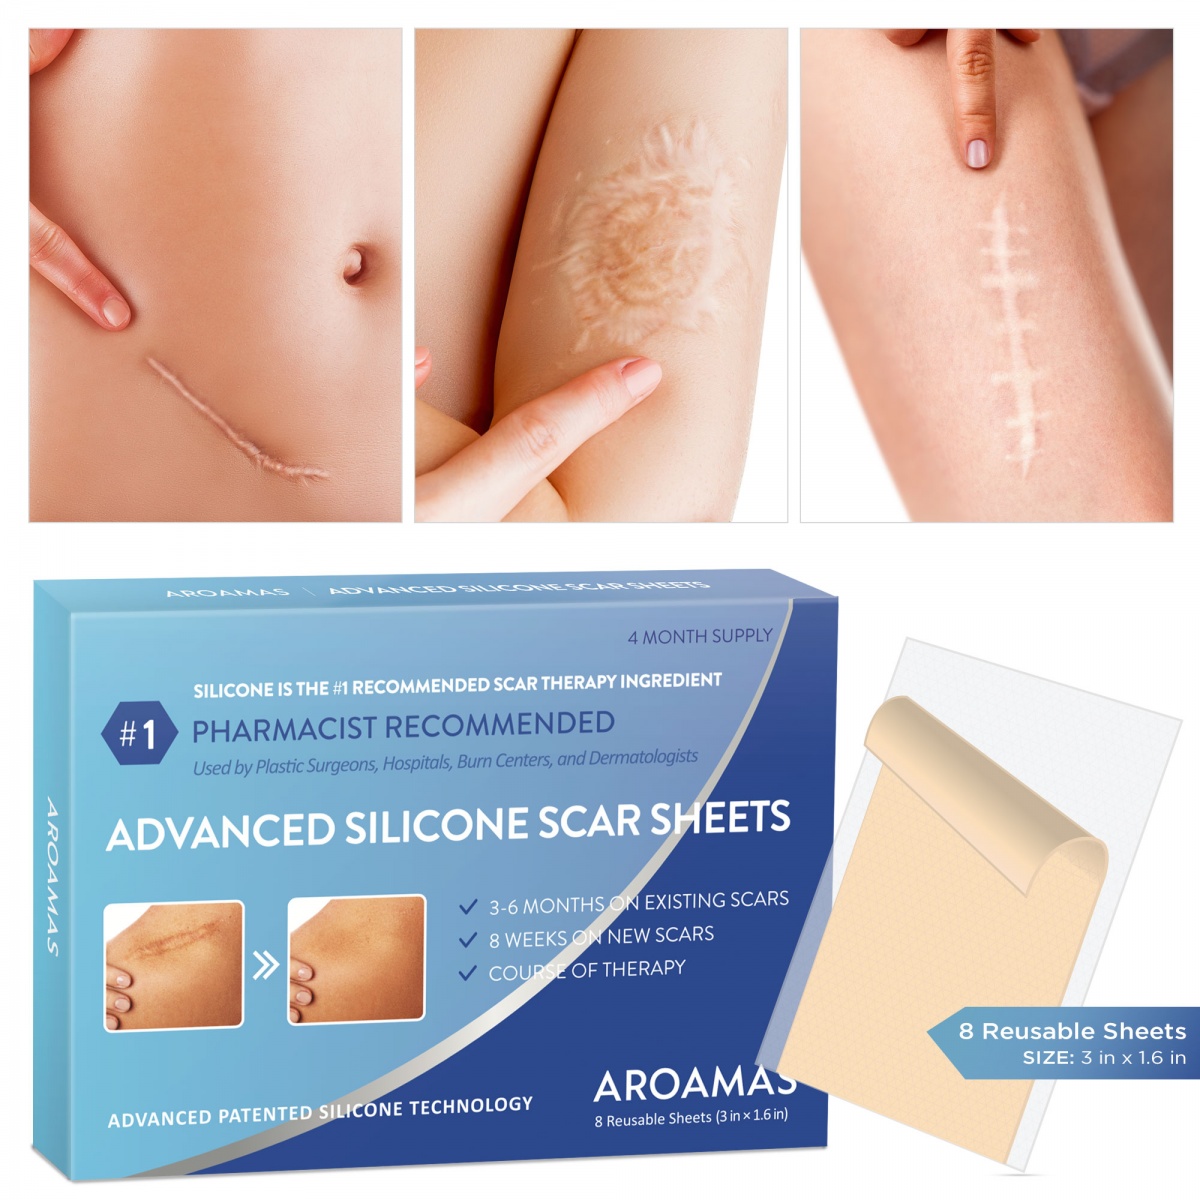 How to use Silicone Gel for Scars